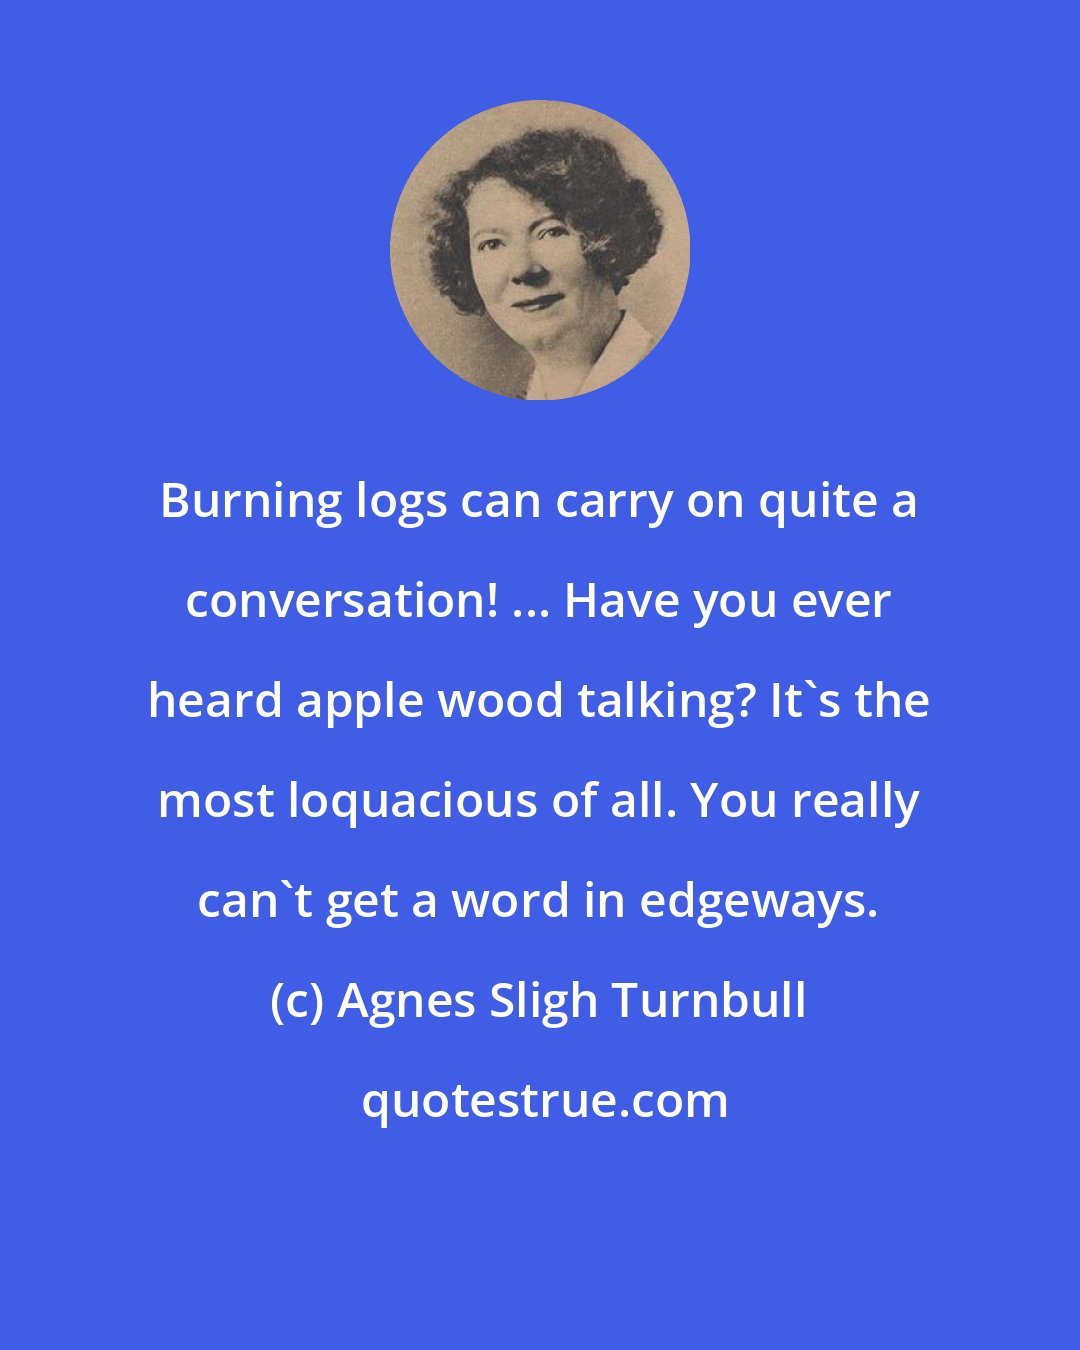 Agnes Sligh Turnbull: Burning logs can carry on quite a conversation! ... Have you ever heard apple wood talking? It's the most loquacious of all. You really can't get a word in edgeways.